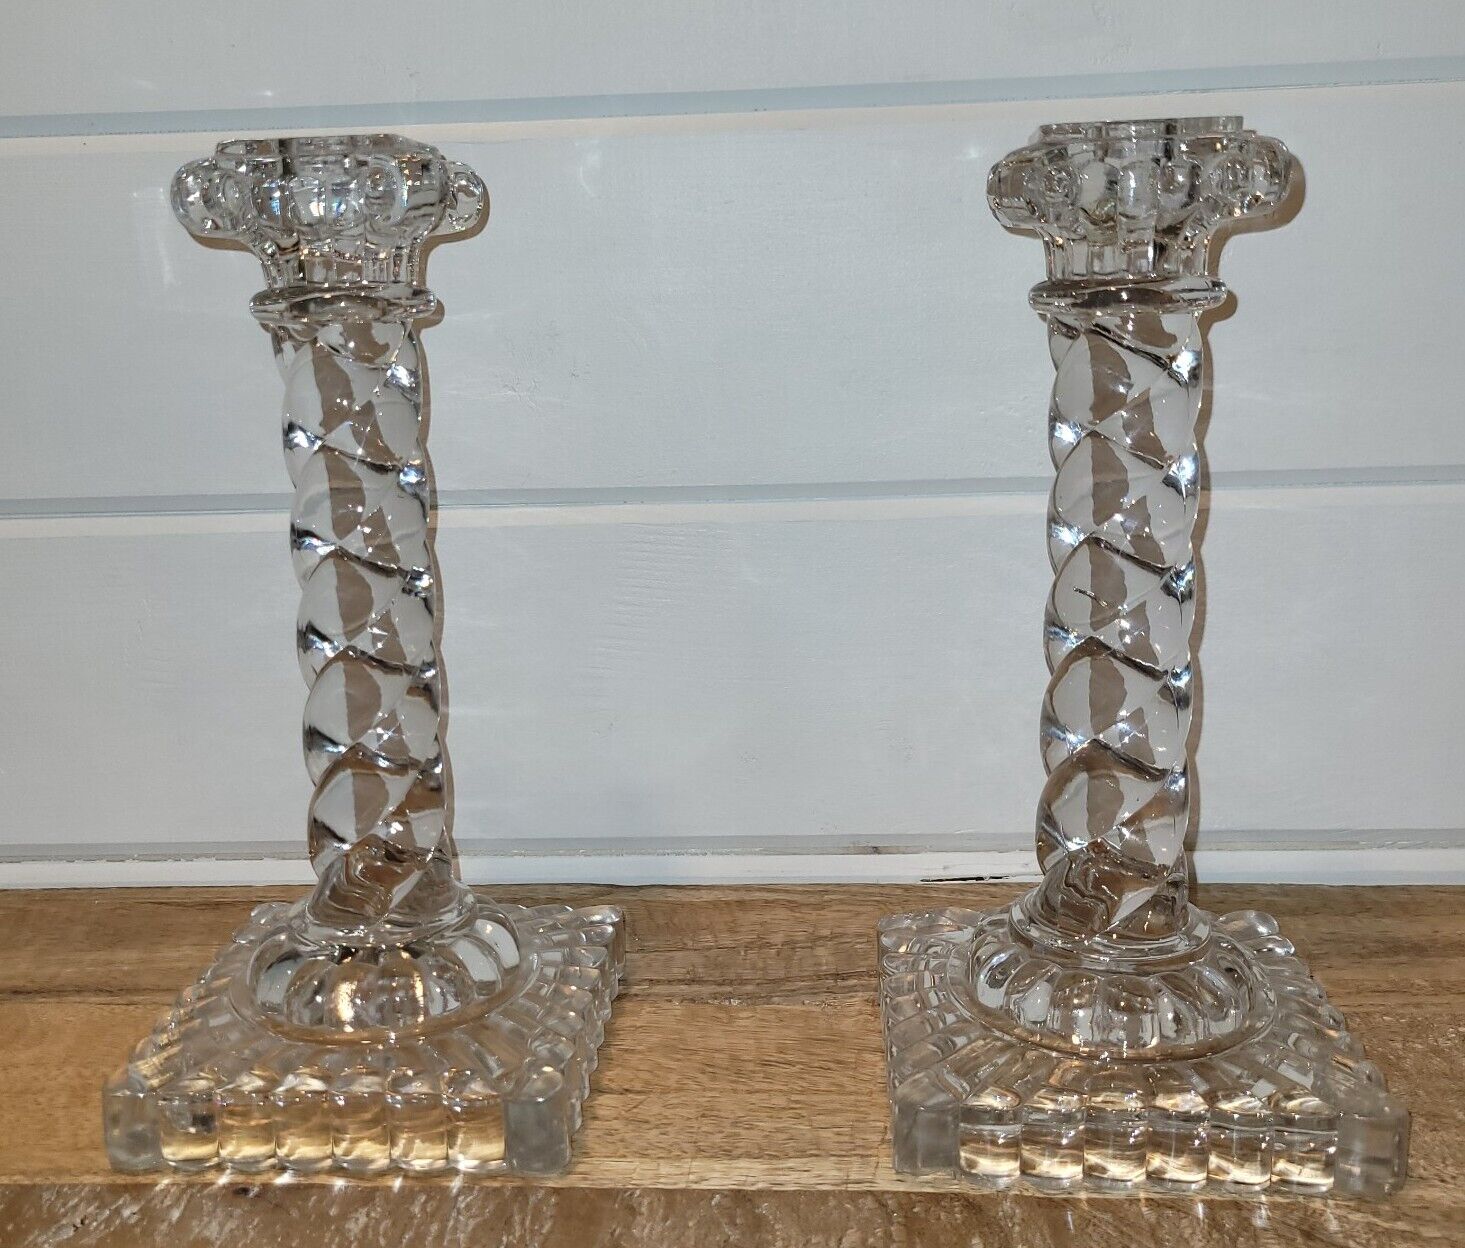 Matched Pair Early 20th Century Baccarat Depose Candle Sticks